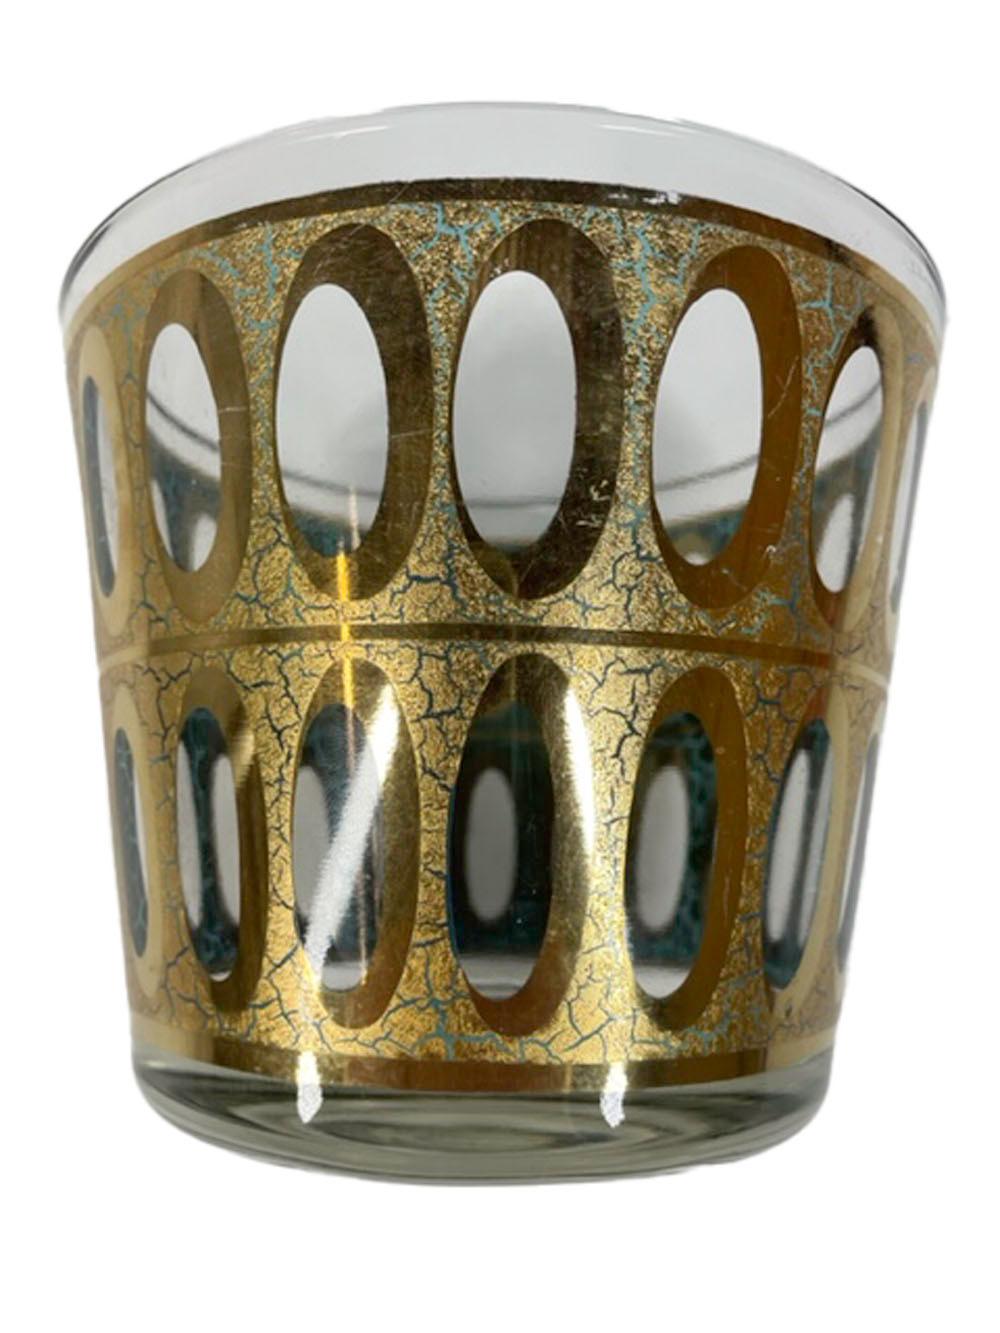 Ice bowl made by Culver, LTD. in the 'Pisa' pattern having crackled 22k gold over translucent green enamel with rows of clear ovals. On the exterior the green is exposed through the crackled gold surface, while the interior shows brighter green